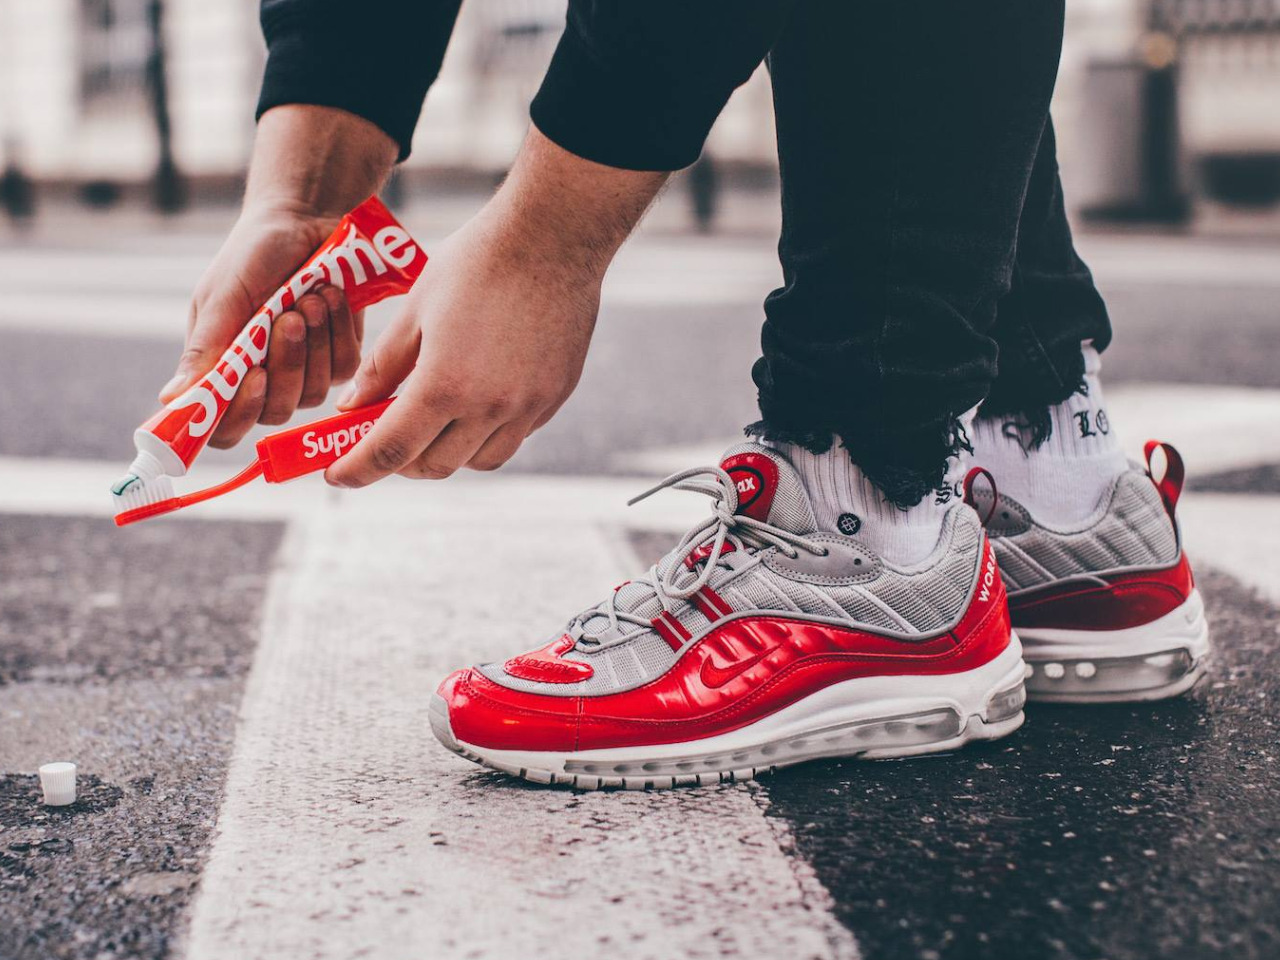 Supreme x Nike Air Max 98 - Varsity Red - 2016 (by – Sweetsoles 